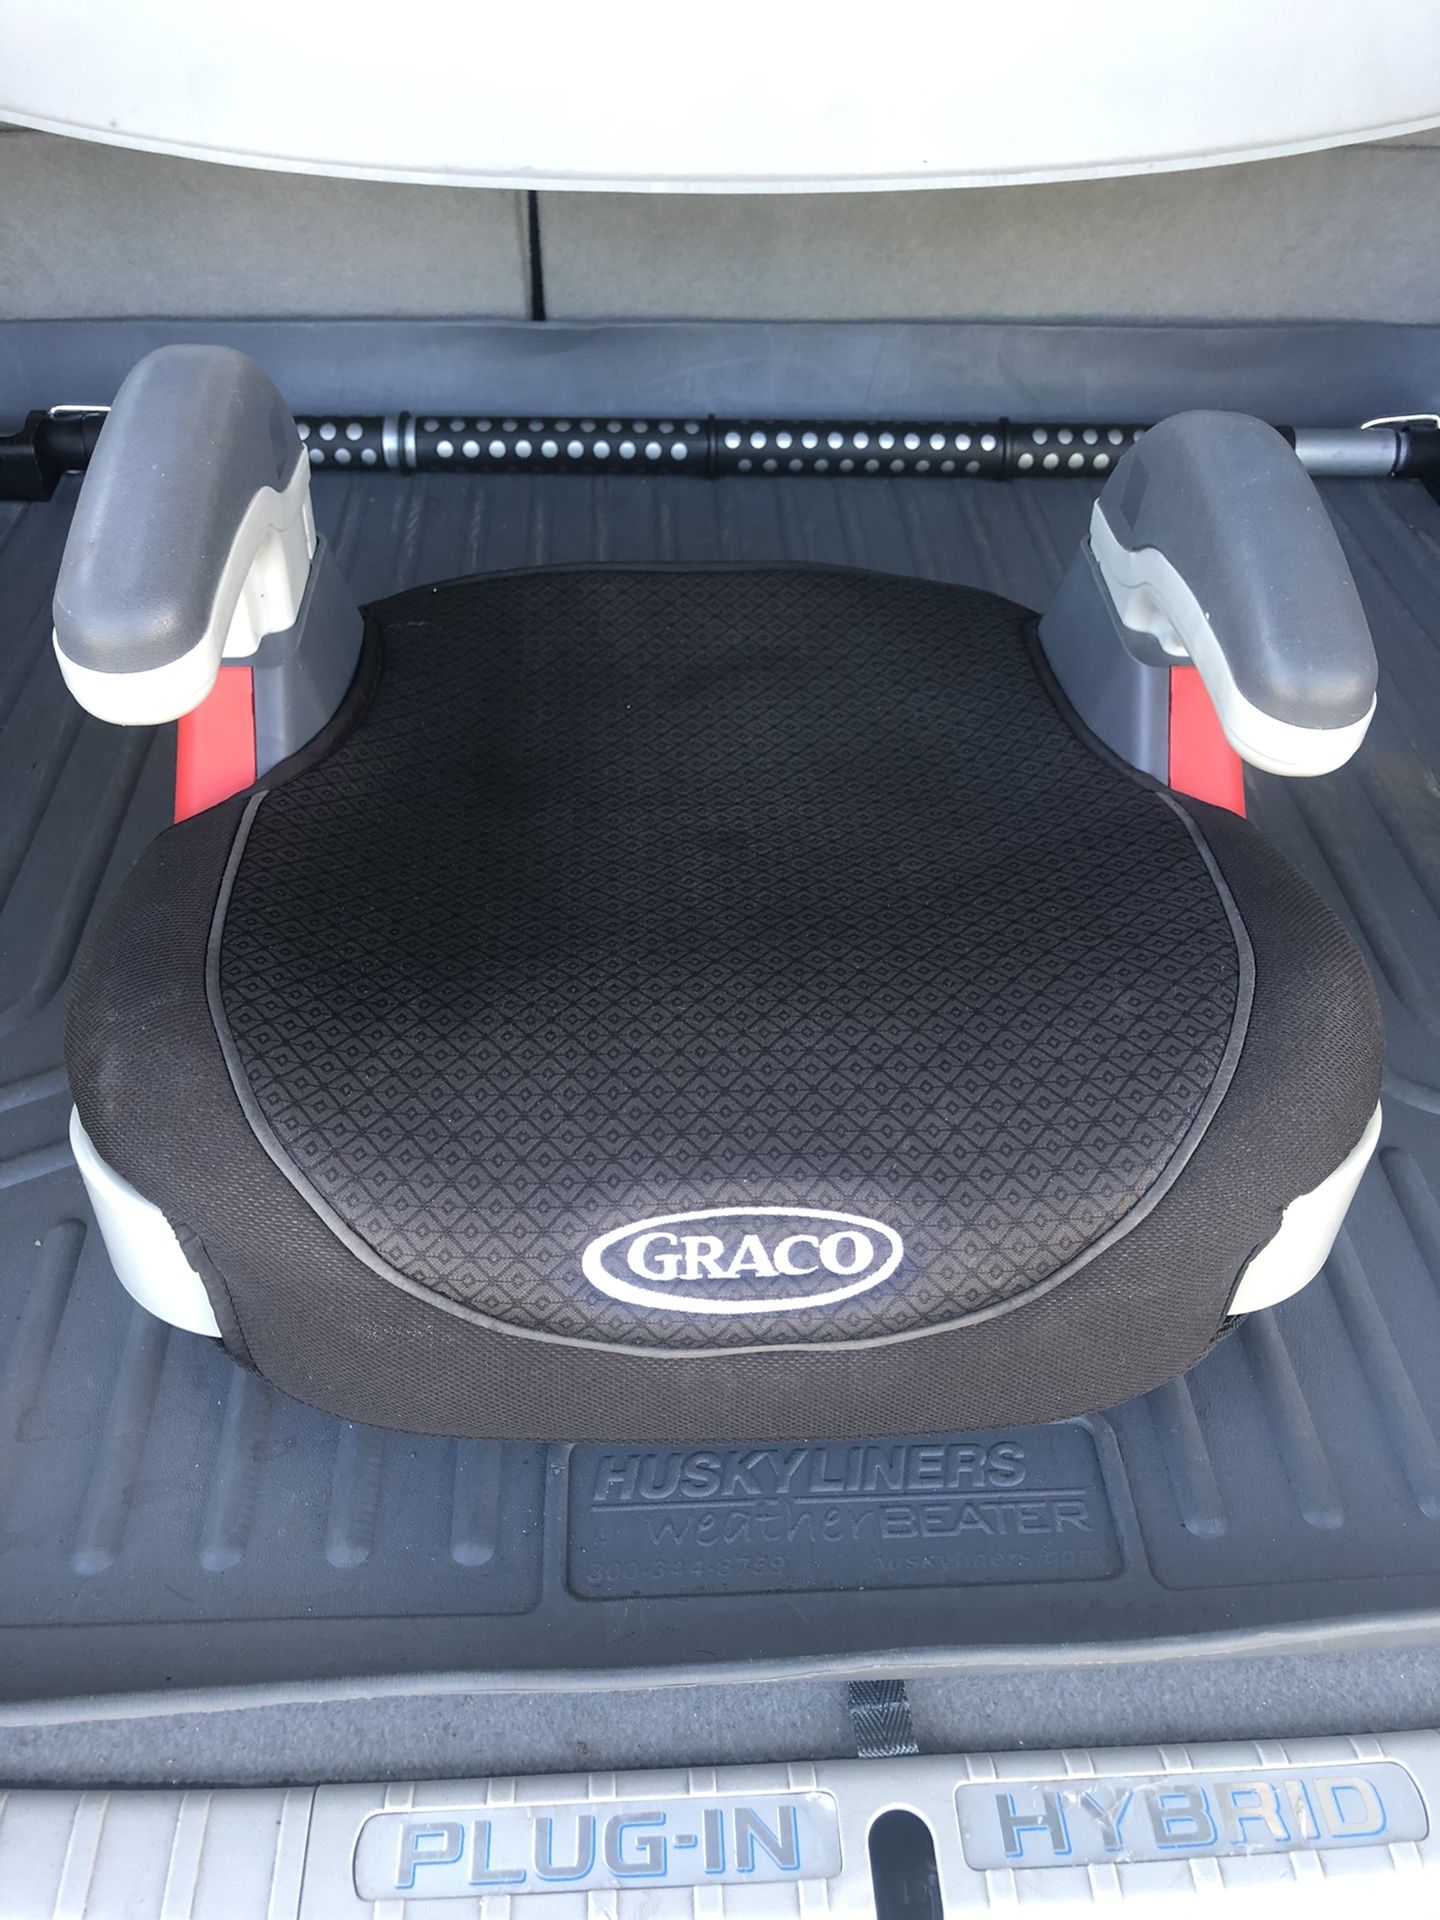 Graco Backless Turbobooster car seat